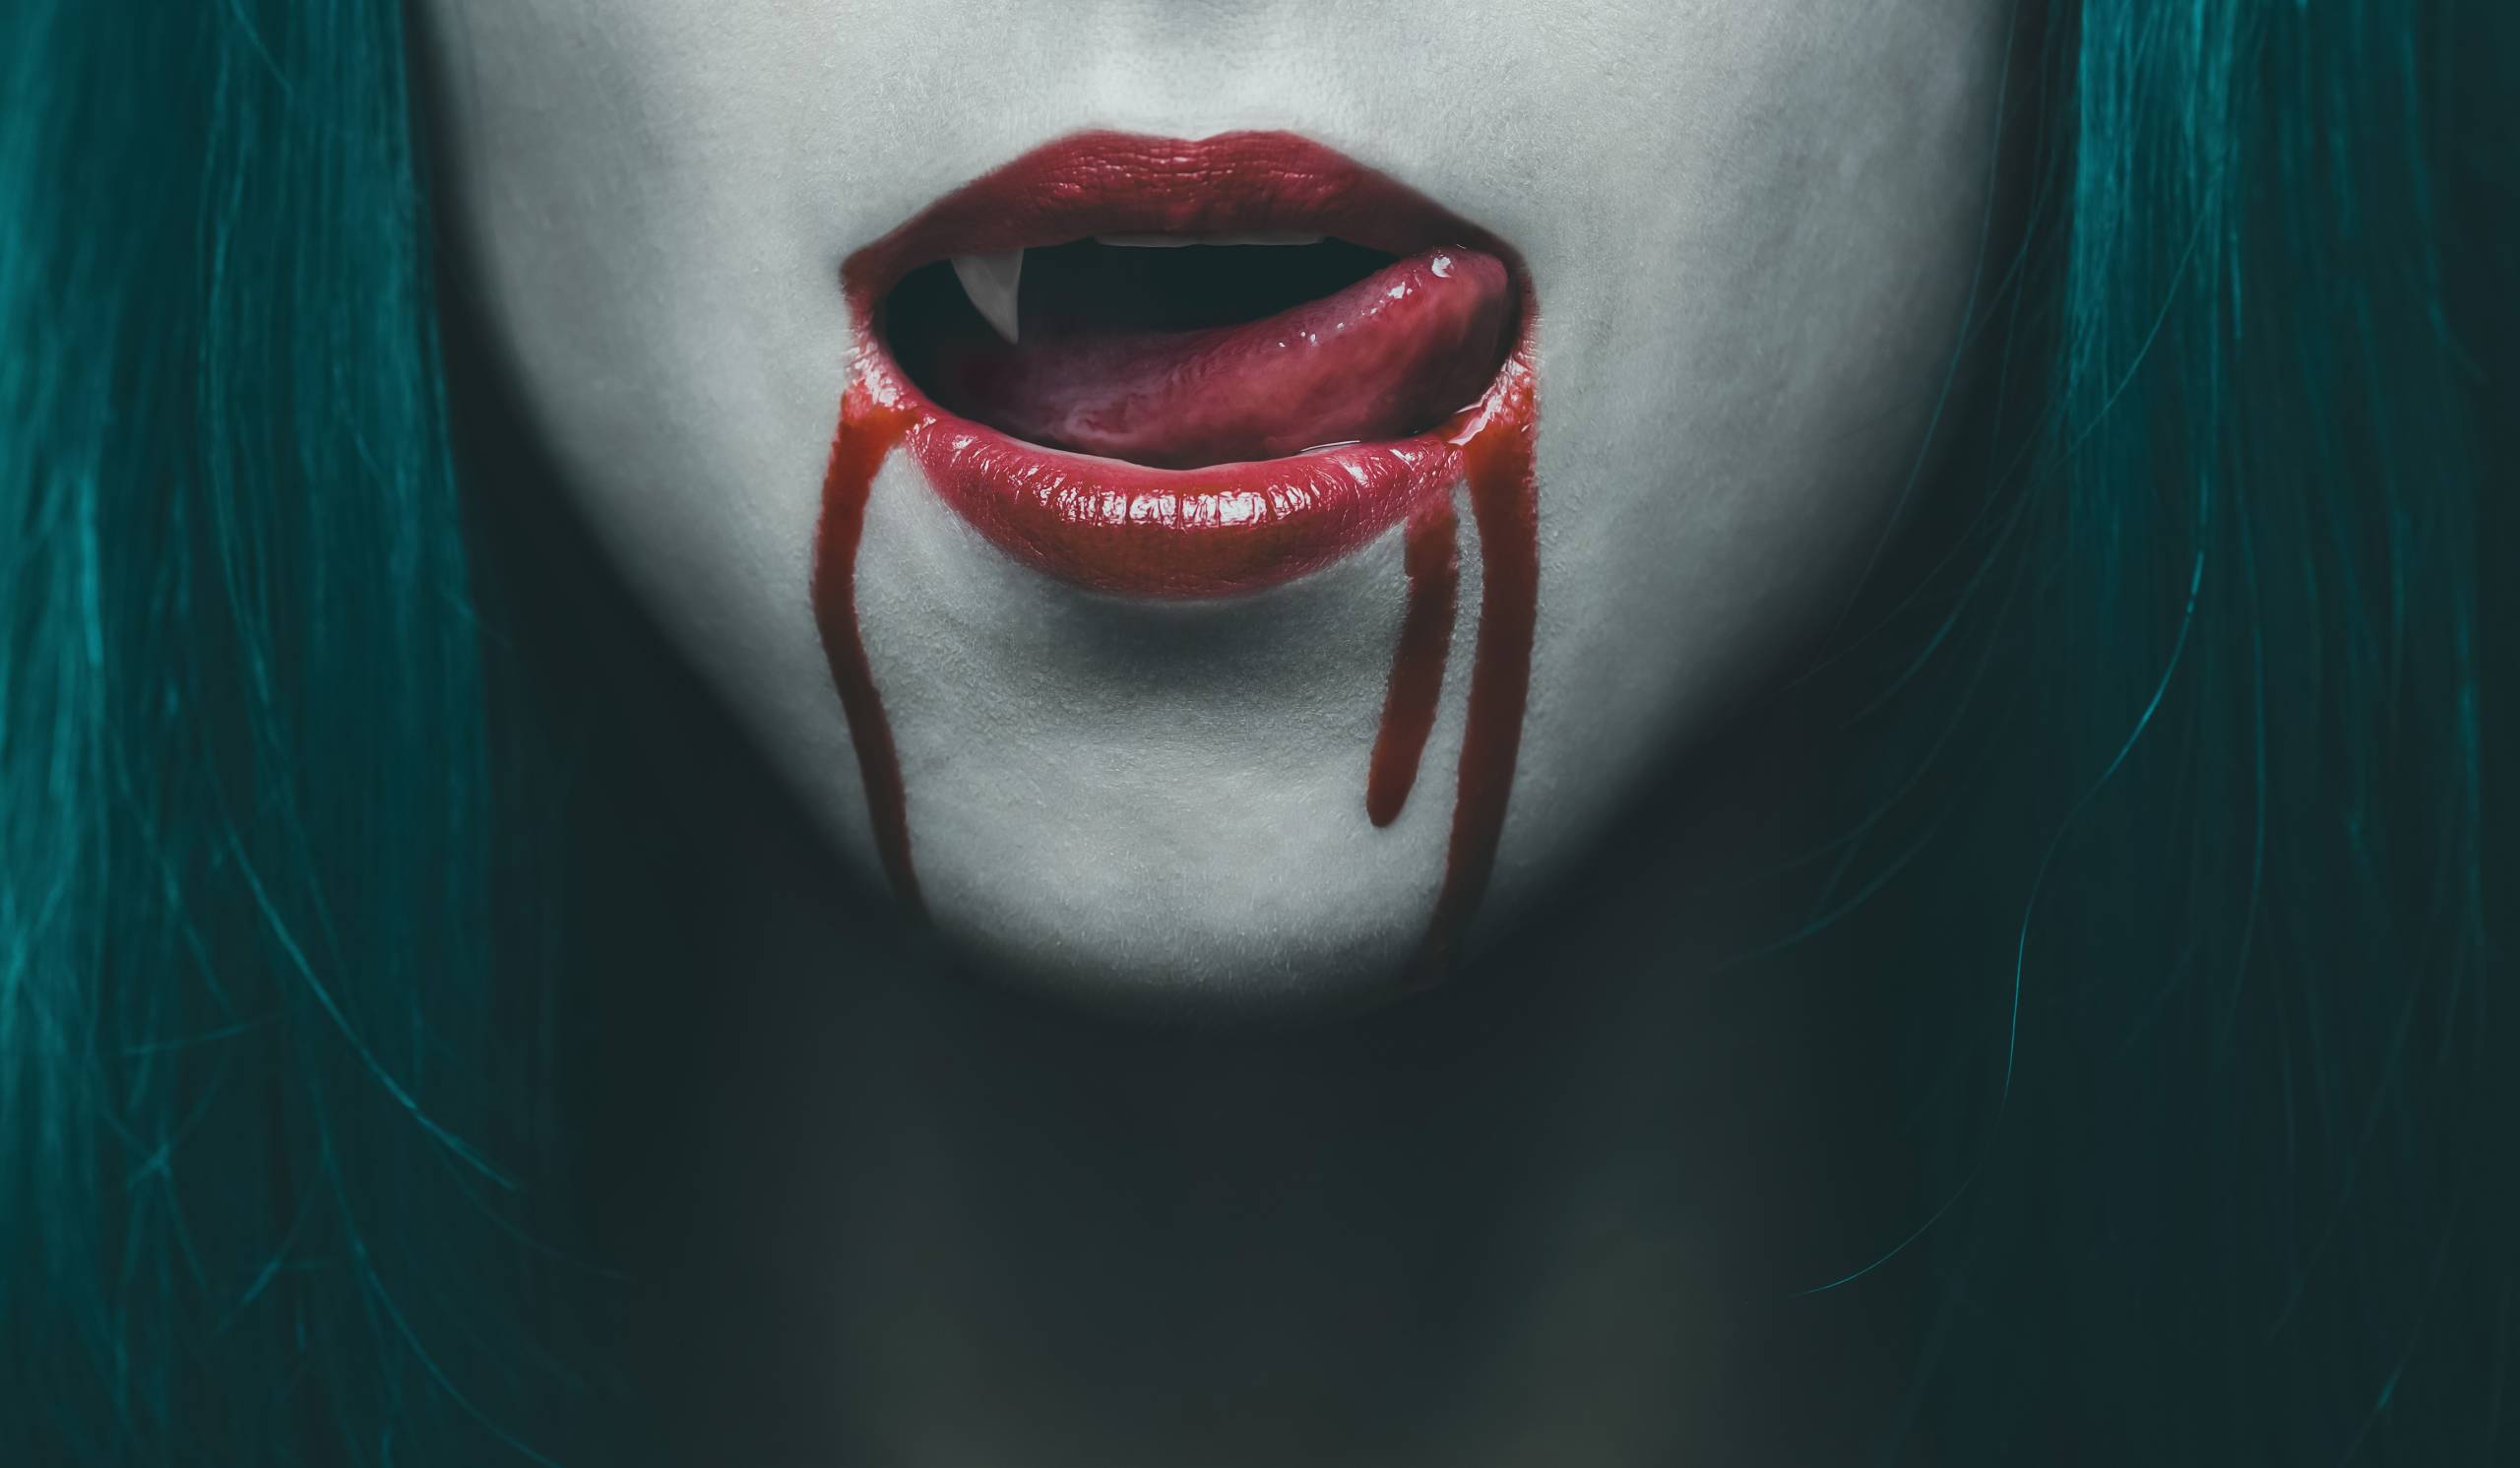 Female, red vampire lips with dripping blood, viewed in close-up.